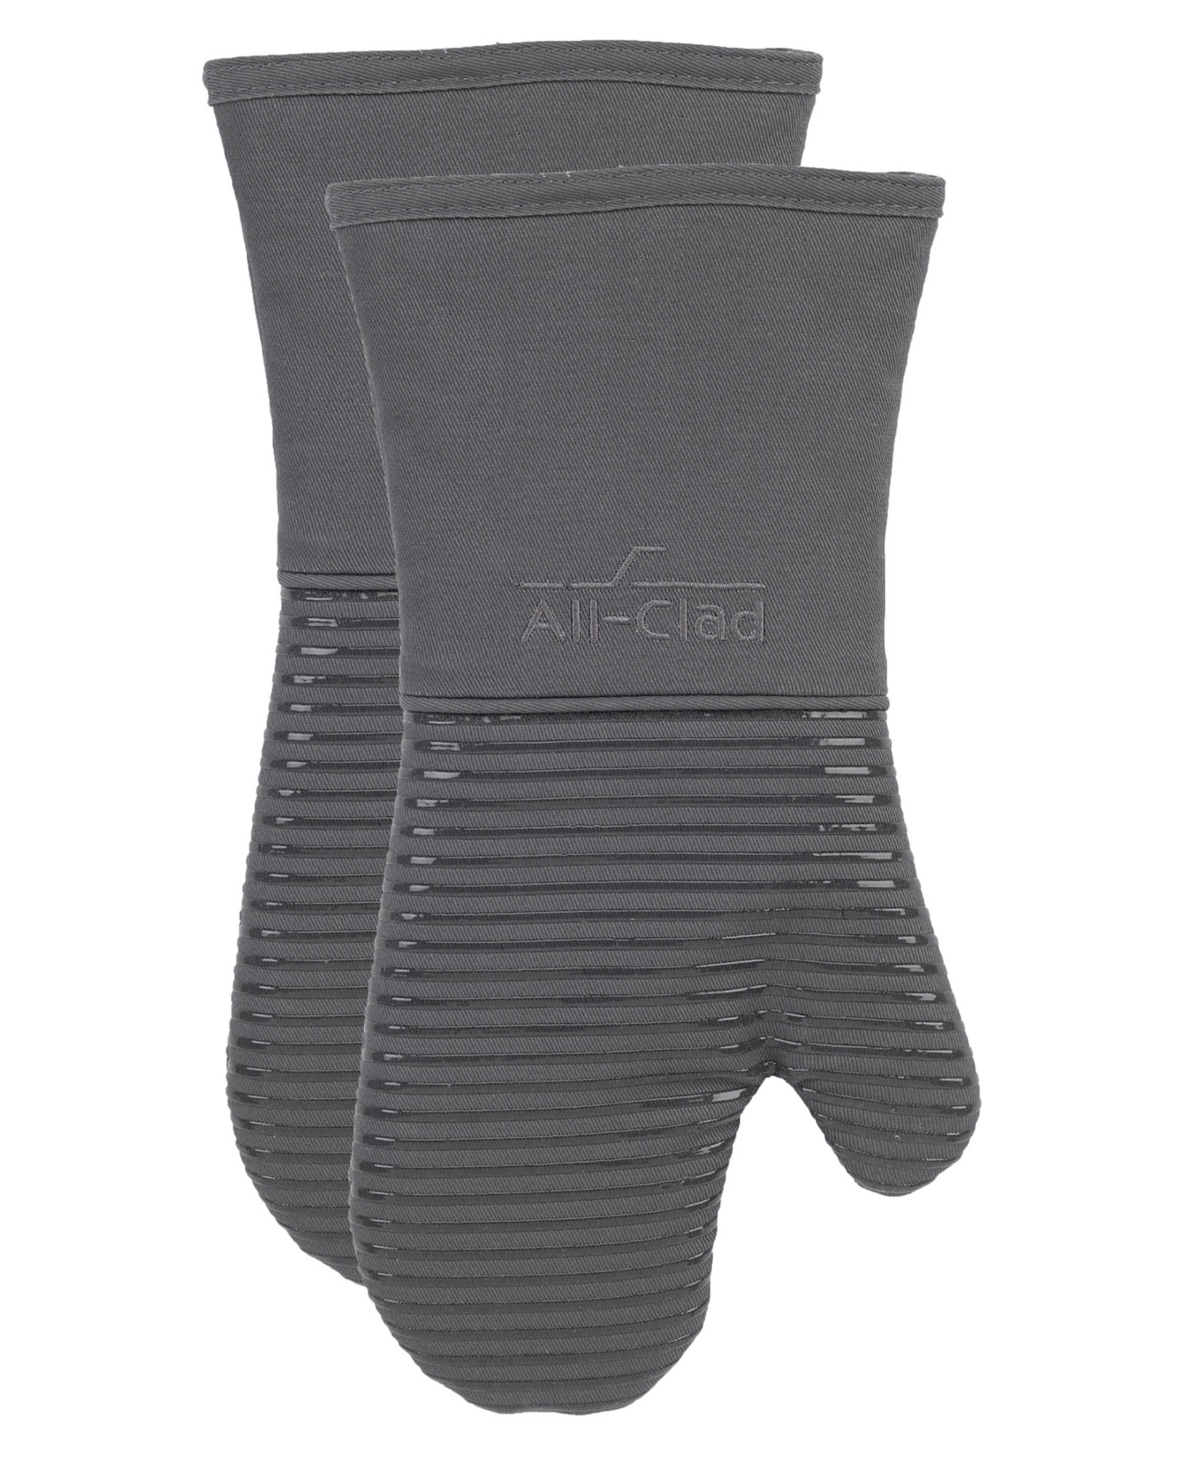 All-clad Ribbed Silicone Cotton Twill Oven Mitt, Set Of 2 In Pewter